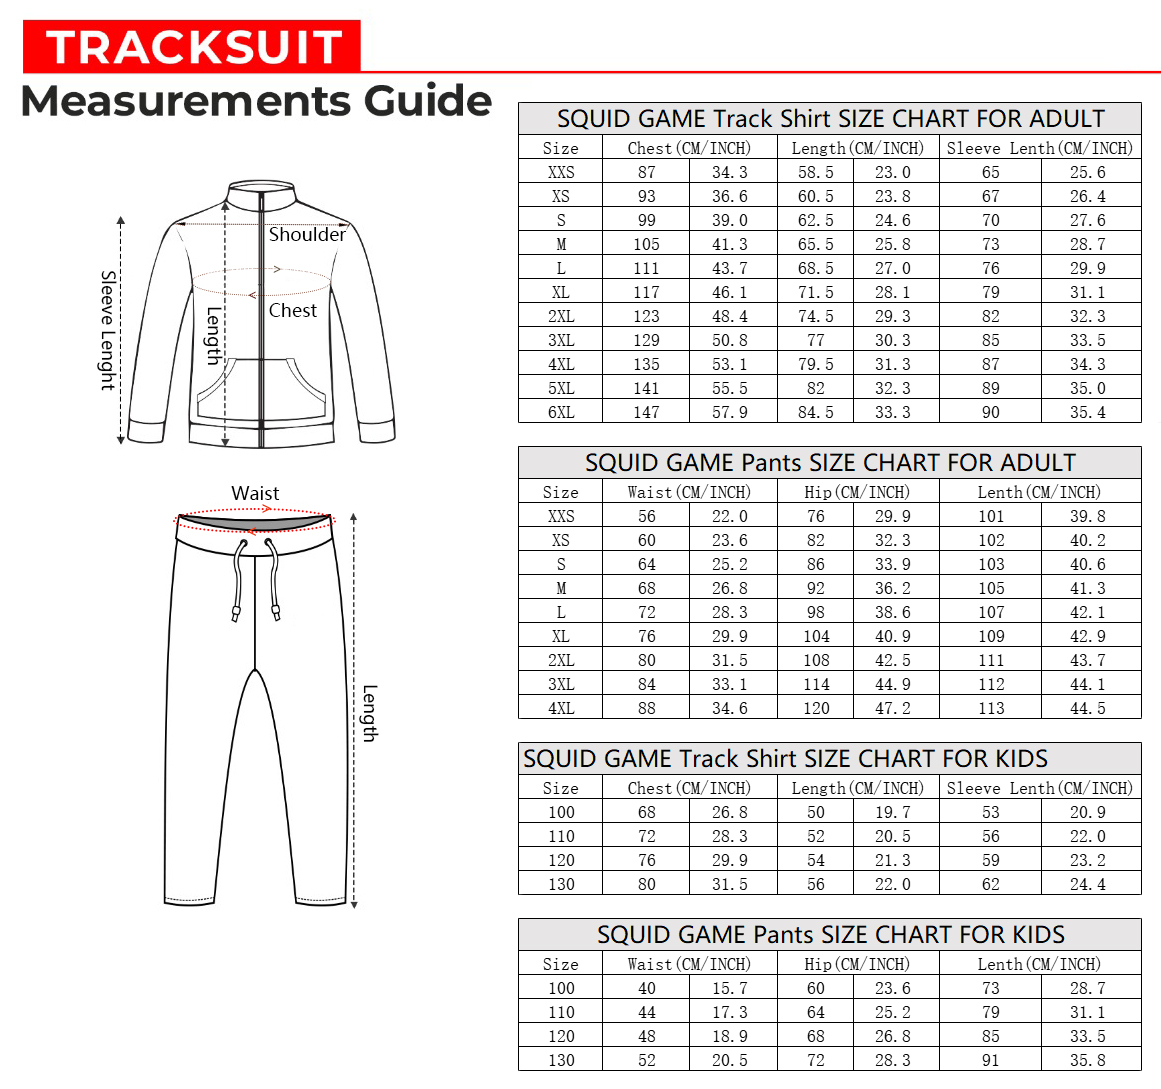 squid game track suit size chart